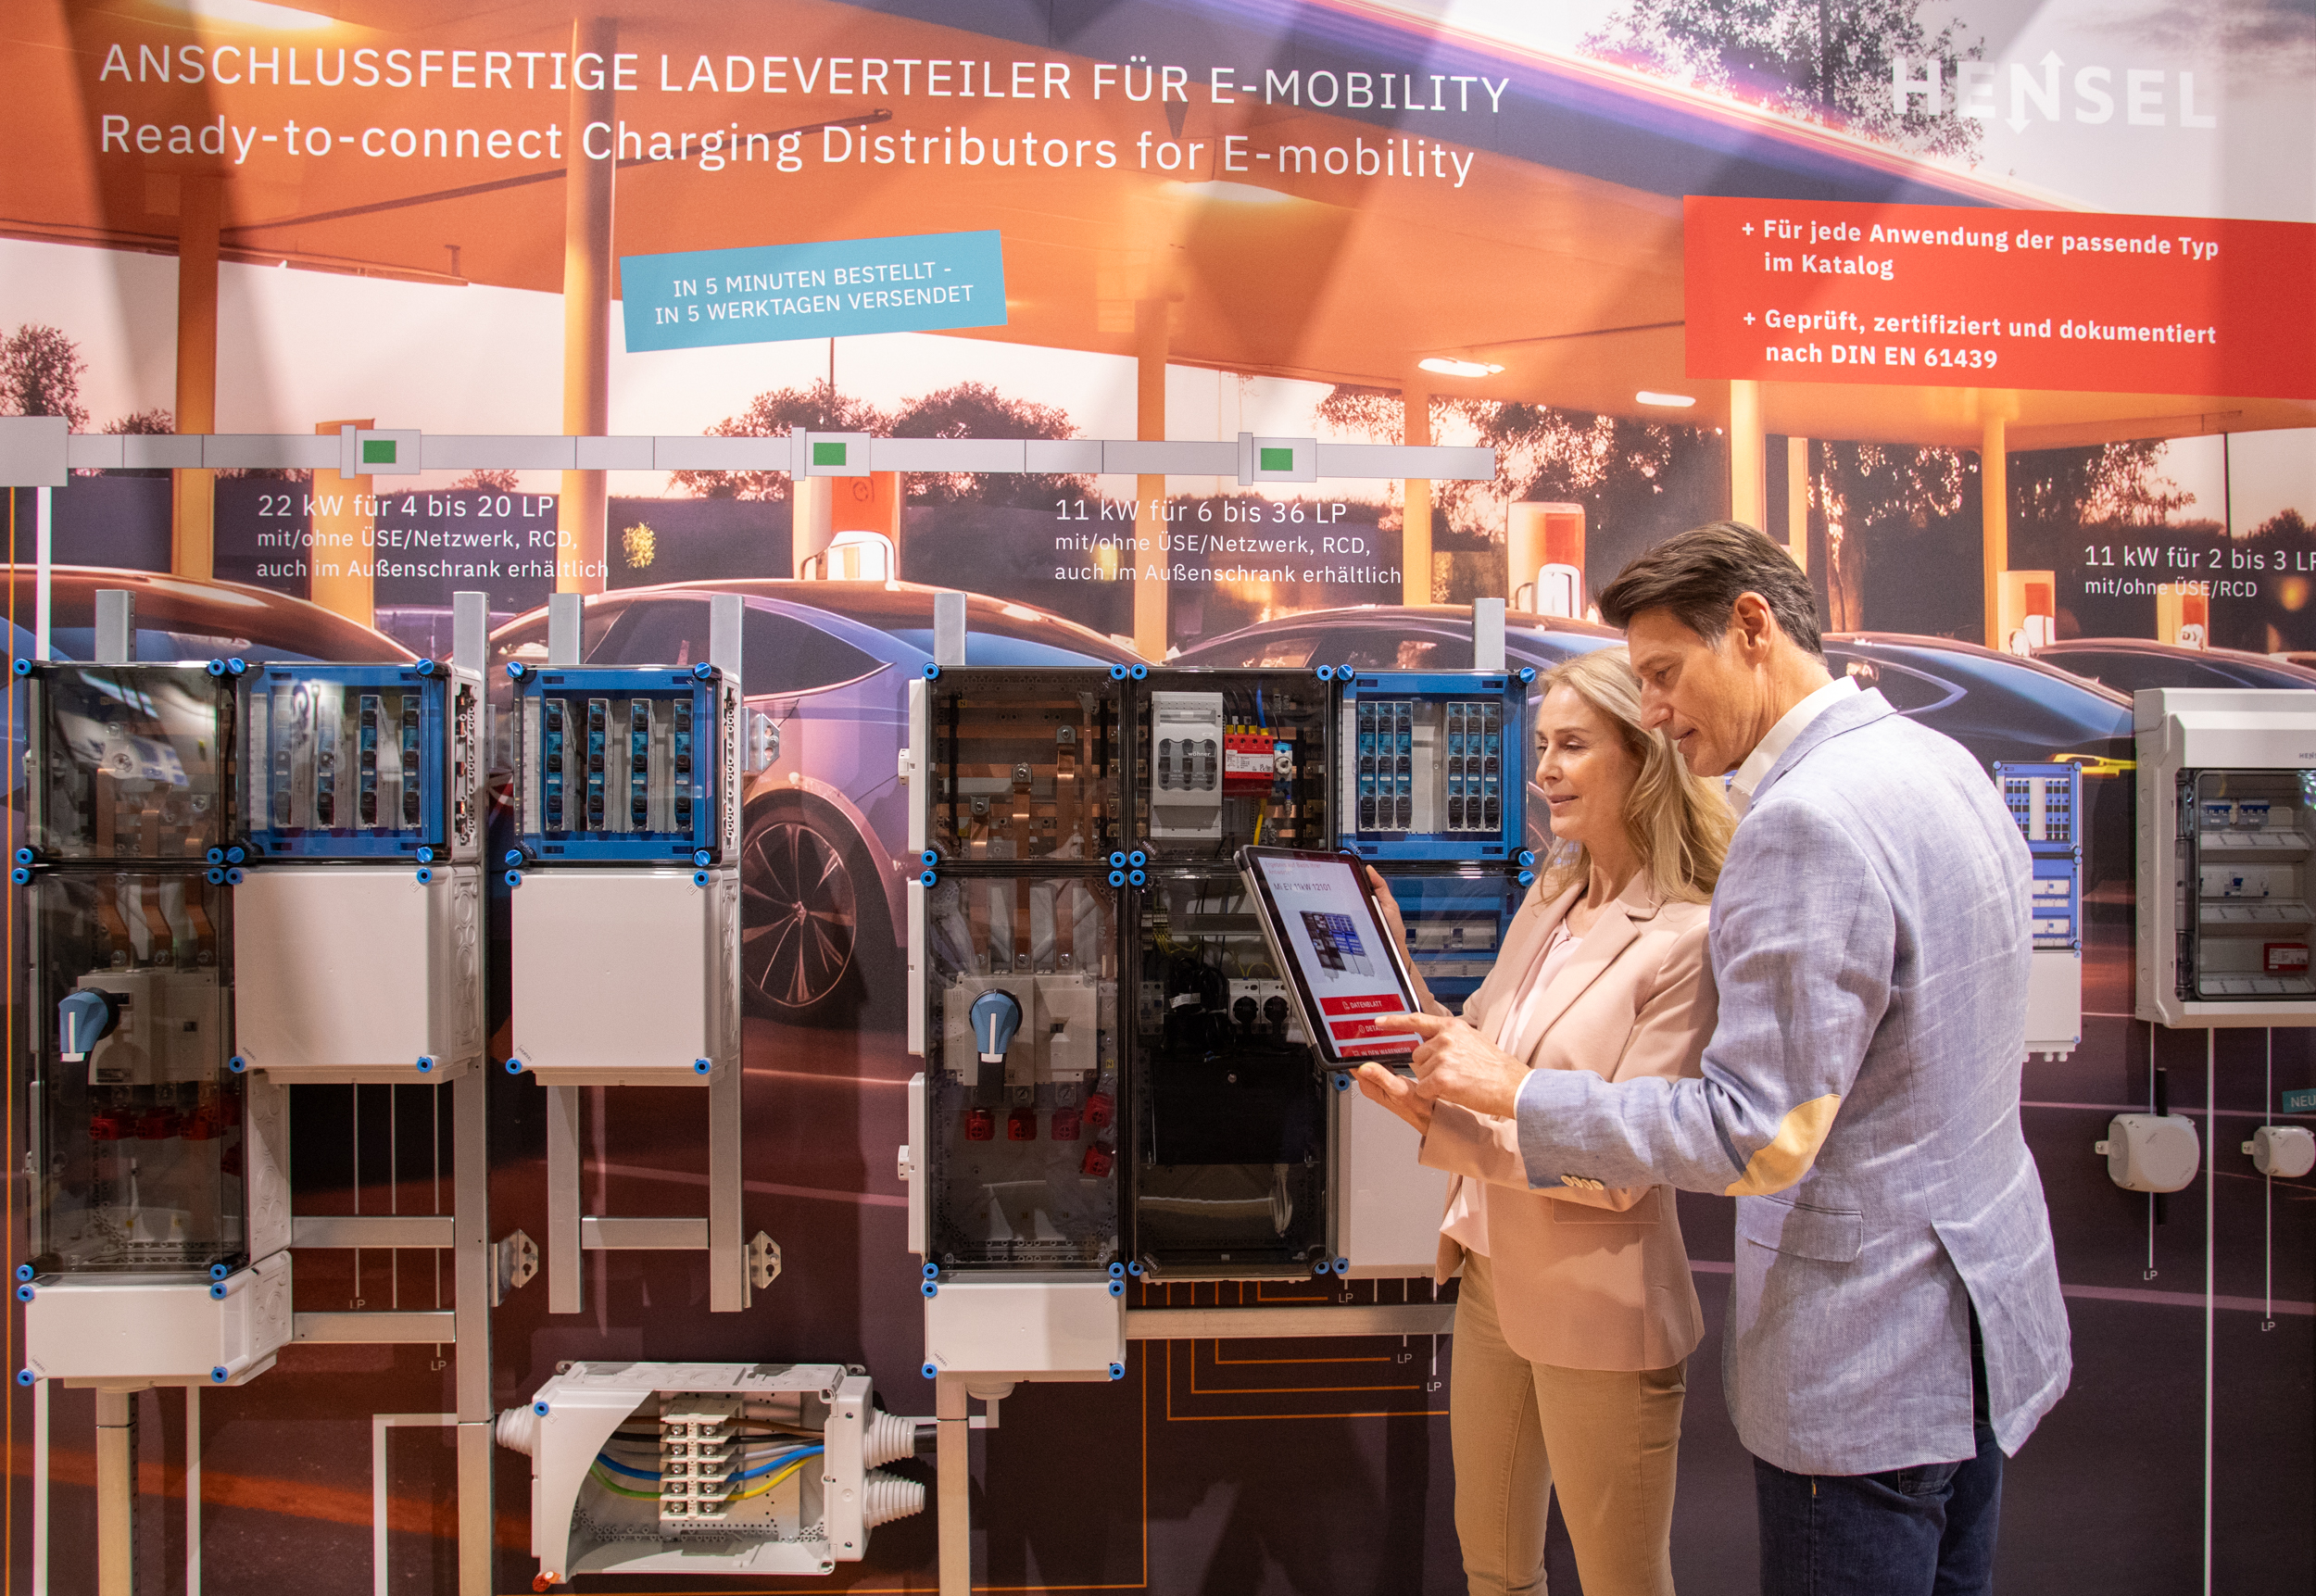 Anschlussfertige Ladeverteiler für E-Mobility / Ready-to-connect charging distributors for e-mobility